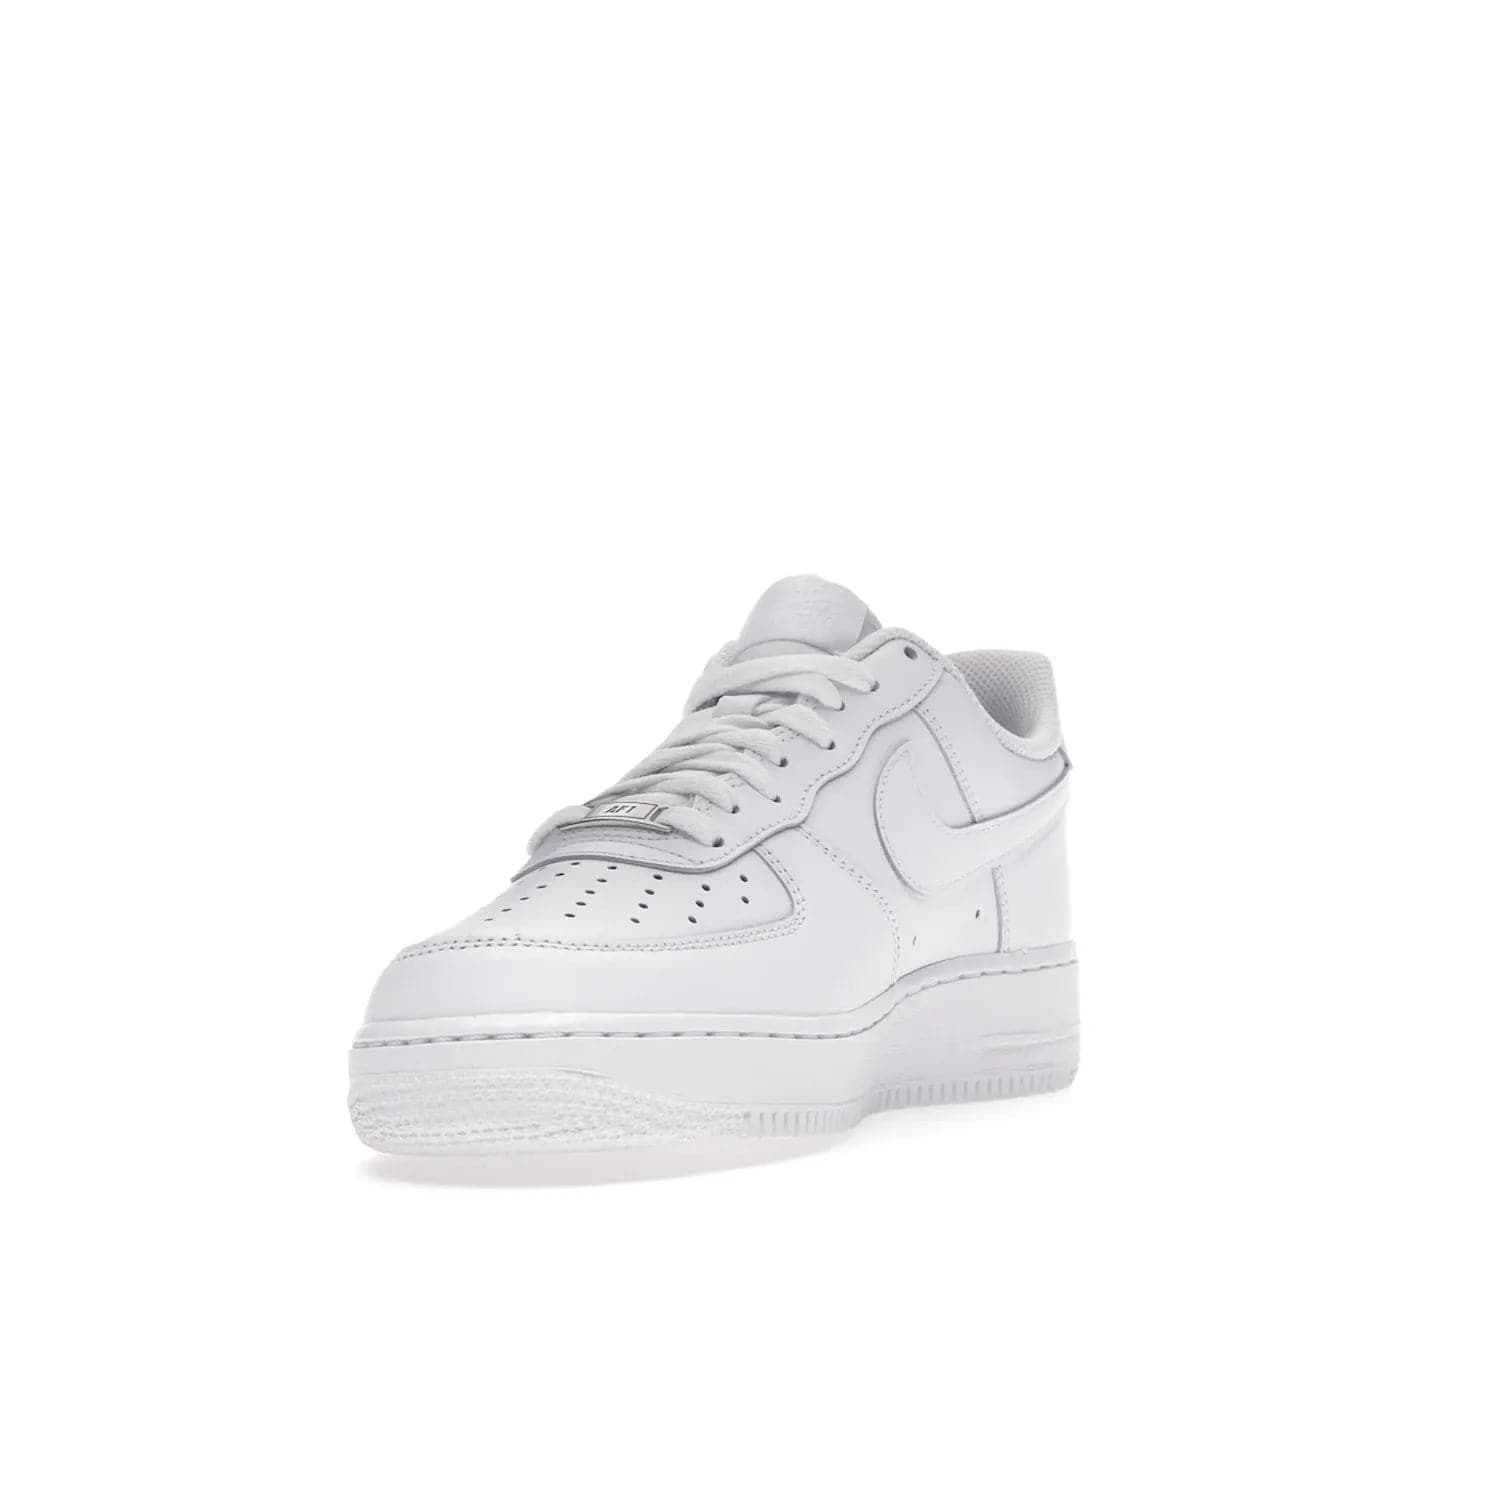 Nike Air Force 1 Low '07 White - Image 13 - Only at www.BallersClubKickz.com - ##
Iconic Swoosh overlays and crisp white sole make the classic Nike Air Force 1 Low White '07 an essential colorway. Classic for seasoned heads and new fans alike.